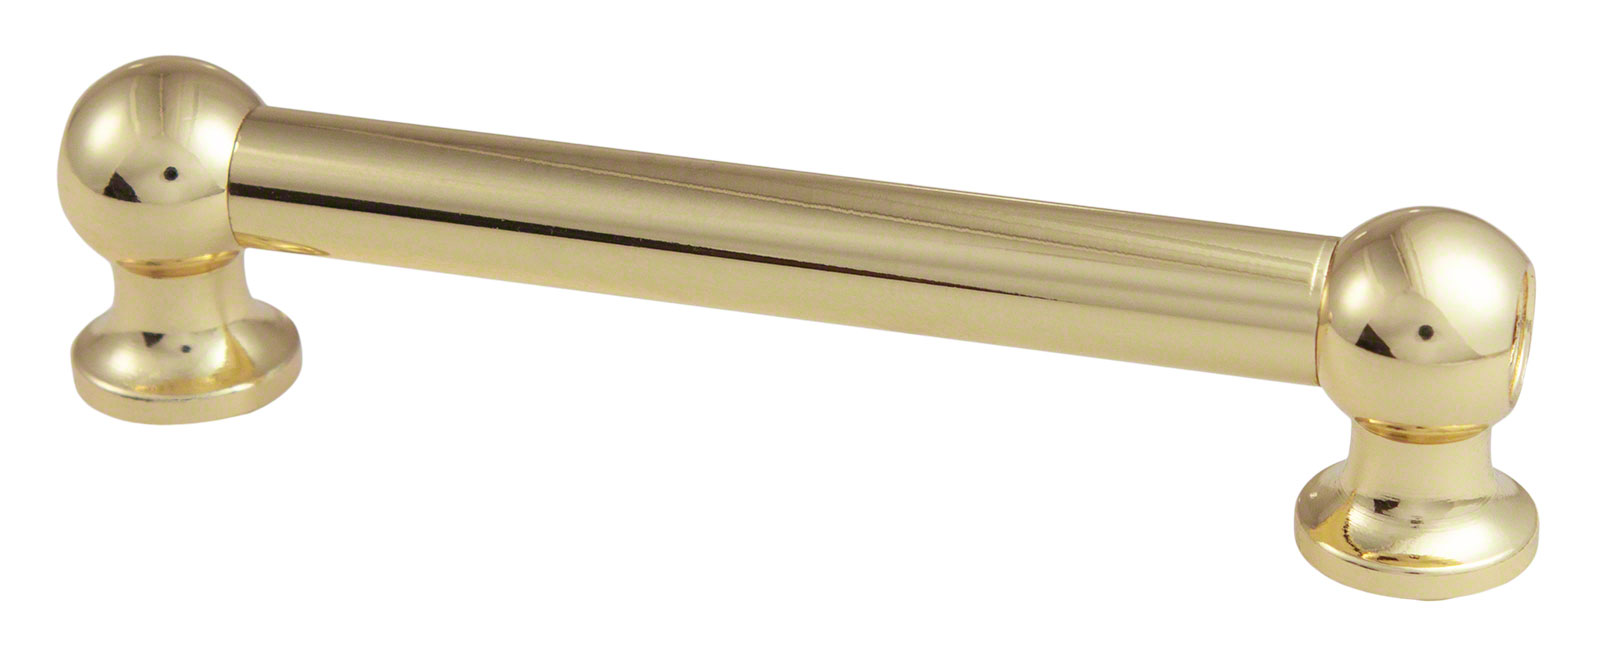 SPAREDRUM TL12D70-BR - TUBE LUG BRASS - 70MM - DOUBLE ENDED (X1)